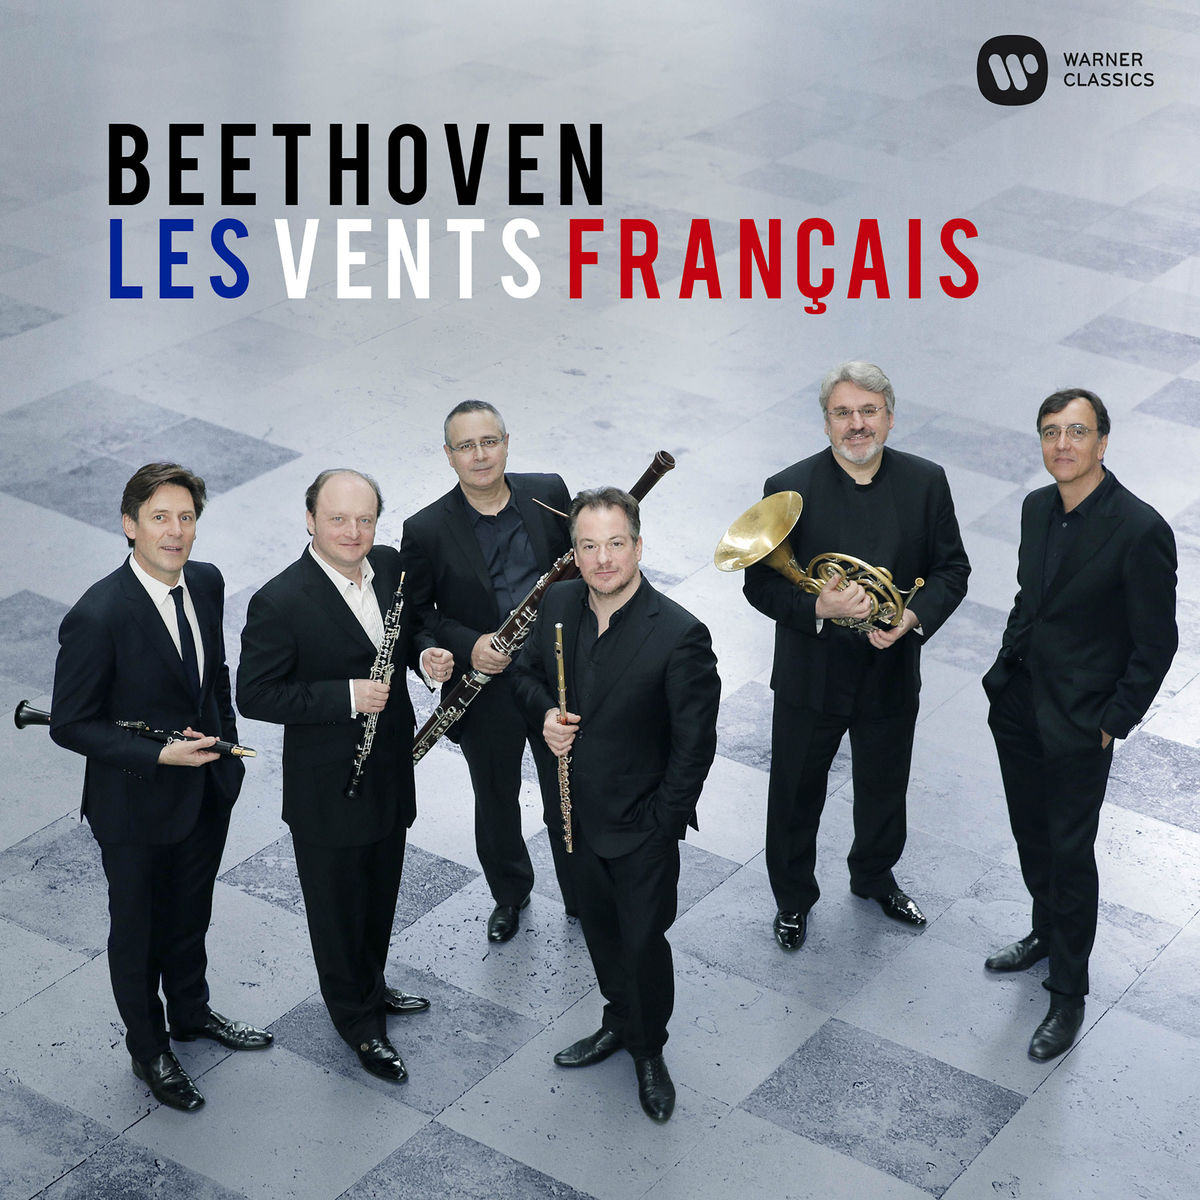 Les Vents Francais - Beethoven: Chamber Music for Winds (2017) [Qobuz FLAC 24bit/48kHz]